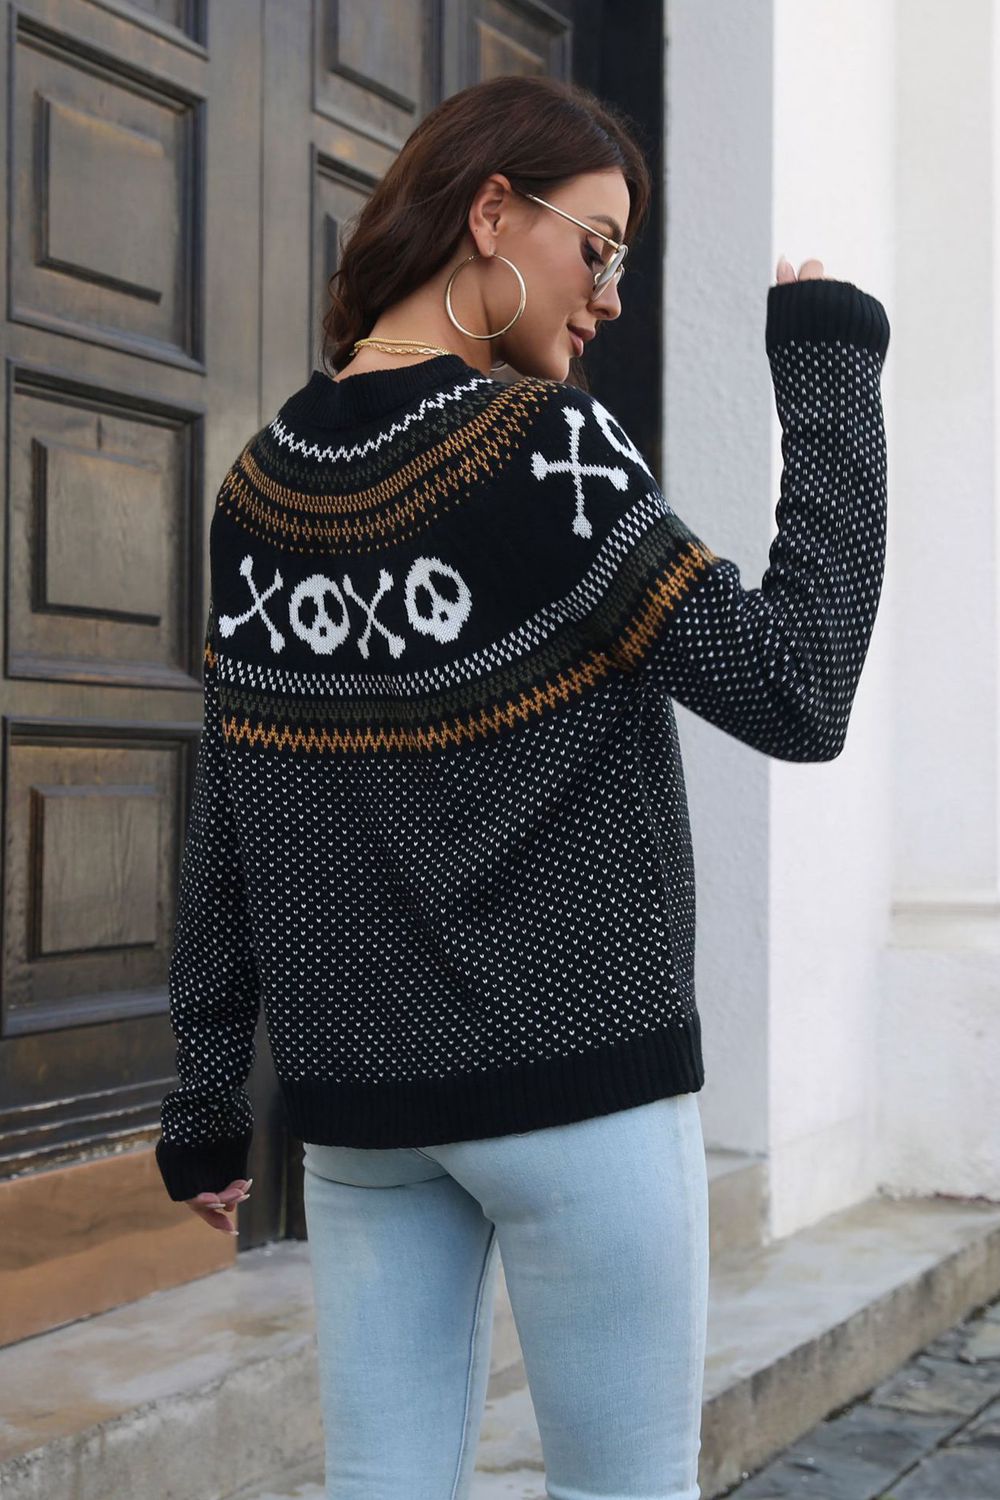 7 Colors - Ghost Pattern Round Neck Long Sleeve Sweater - Sizes S-2XL Ti Amo I love you